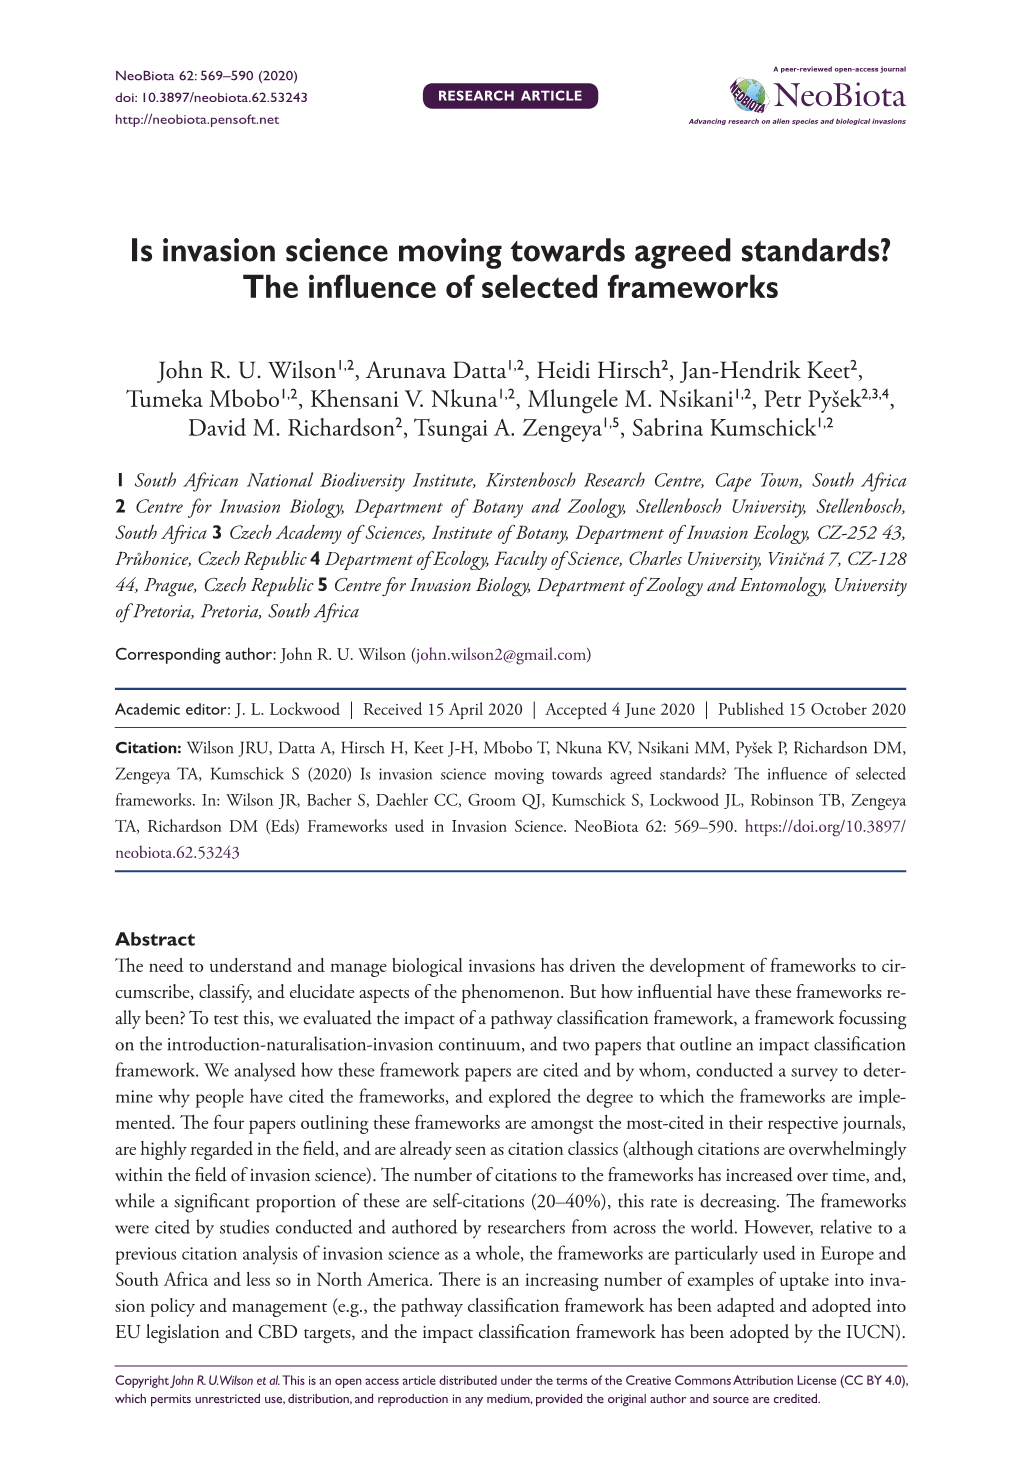 Is Invasion Science Moving Towards Agreed Standards? the Influence of Selected Frameworks